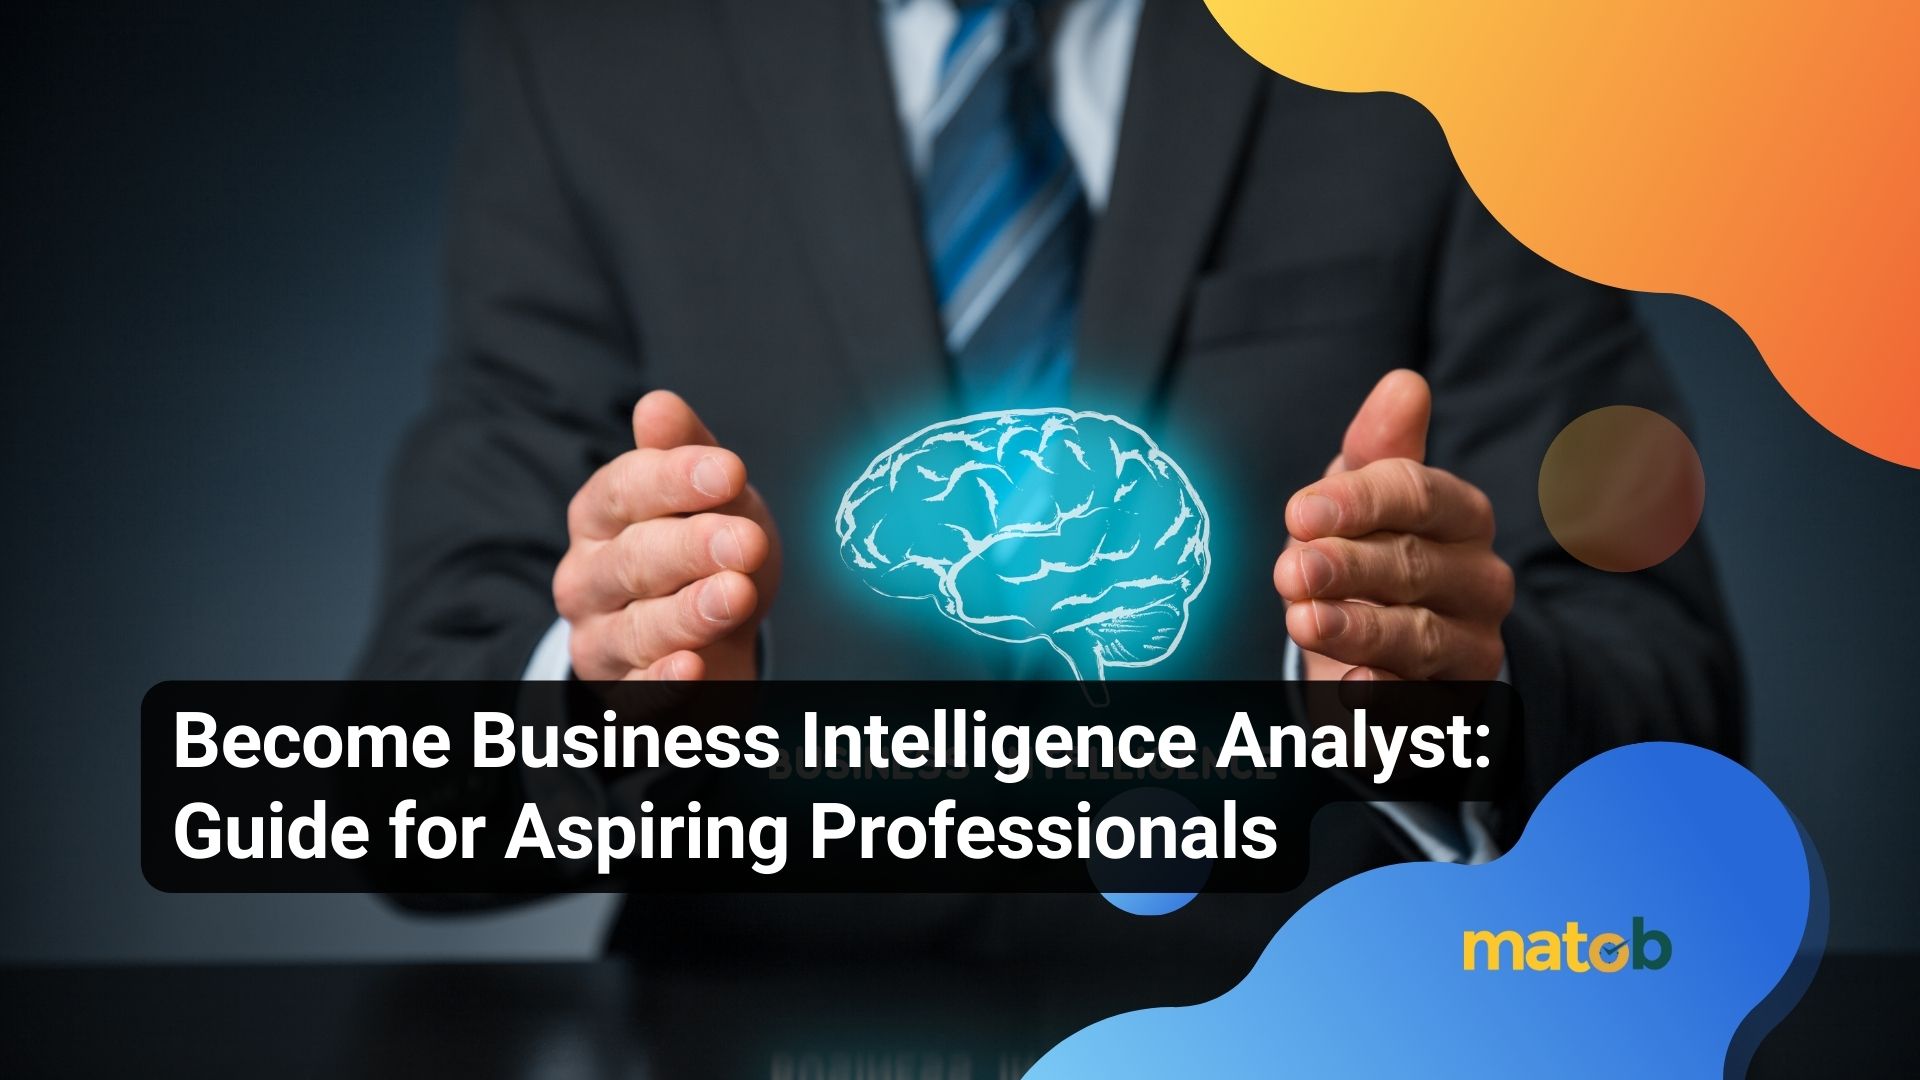 Become Business Intelligence Analyst: Guide for Aspiring Professionals